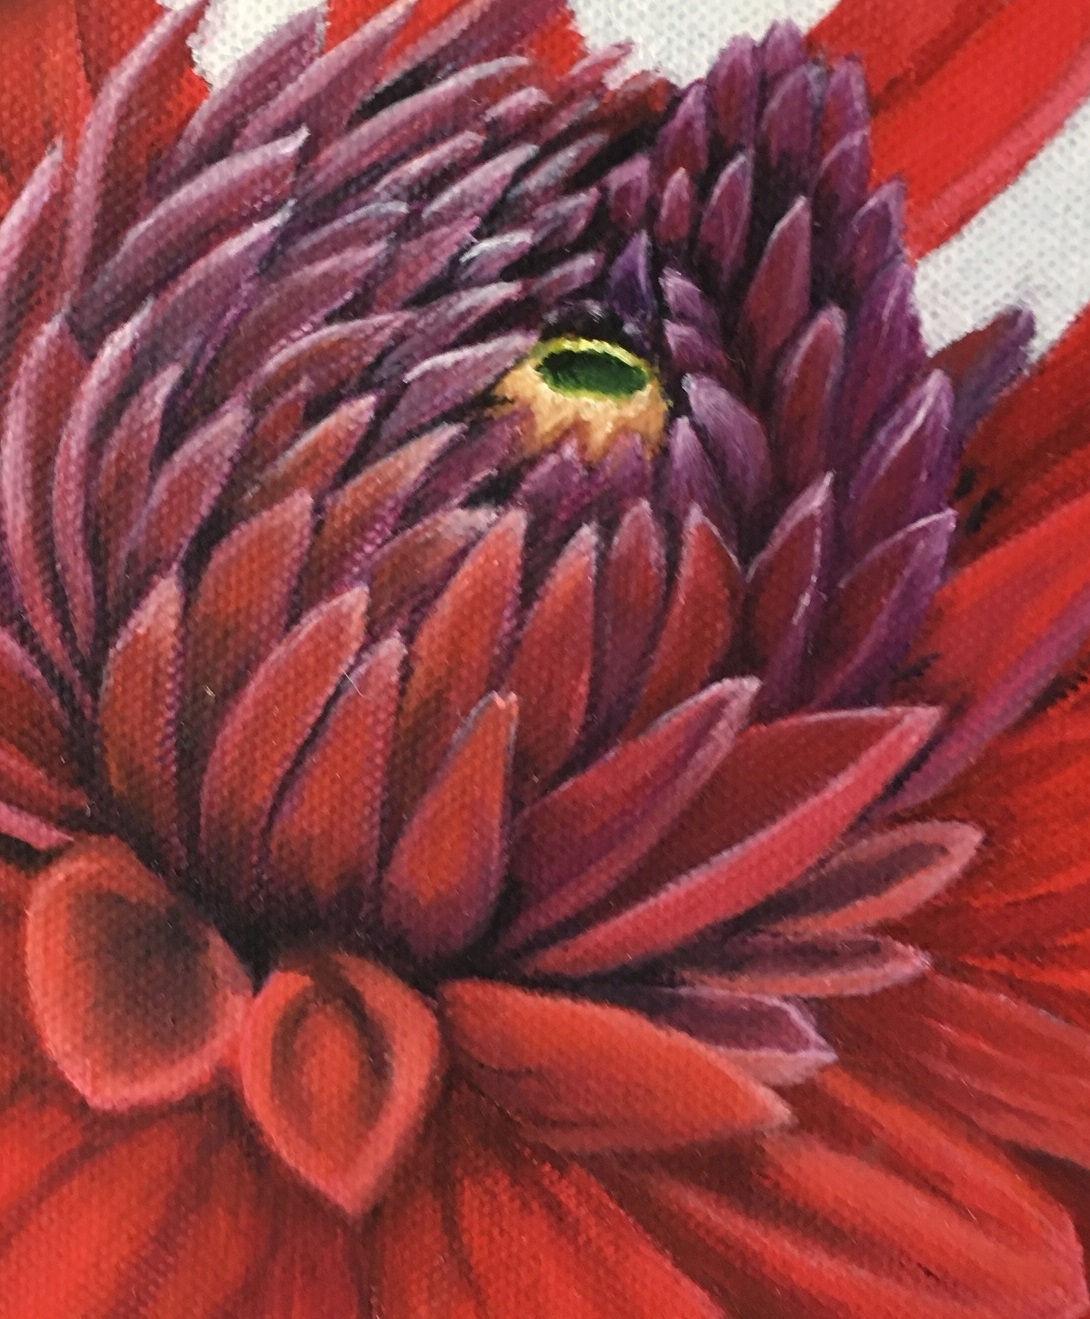 A close-up picture of the red daliah. It is one of four paintings of vividly colored and almost stylistic flowers.

About the artist:

Esther Hansen grew up in the countryside and now lives on a farm. She started her painting career by